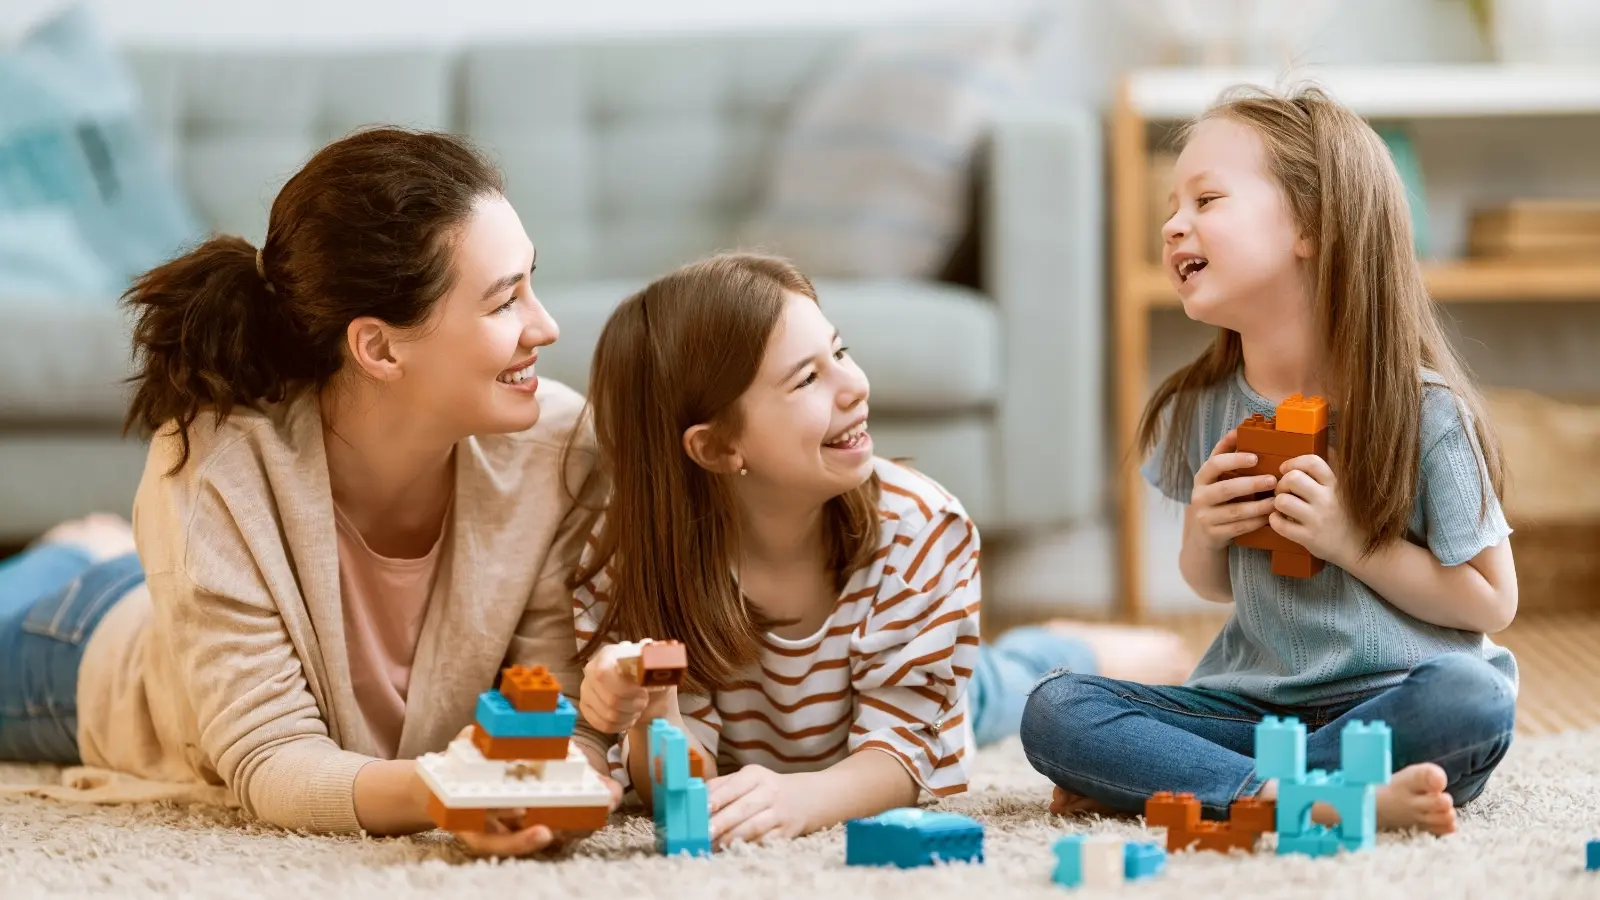 5 easy LEGO games for kids that will bring fun to the whole family